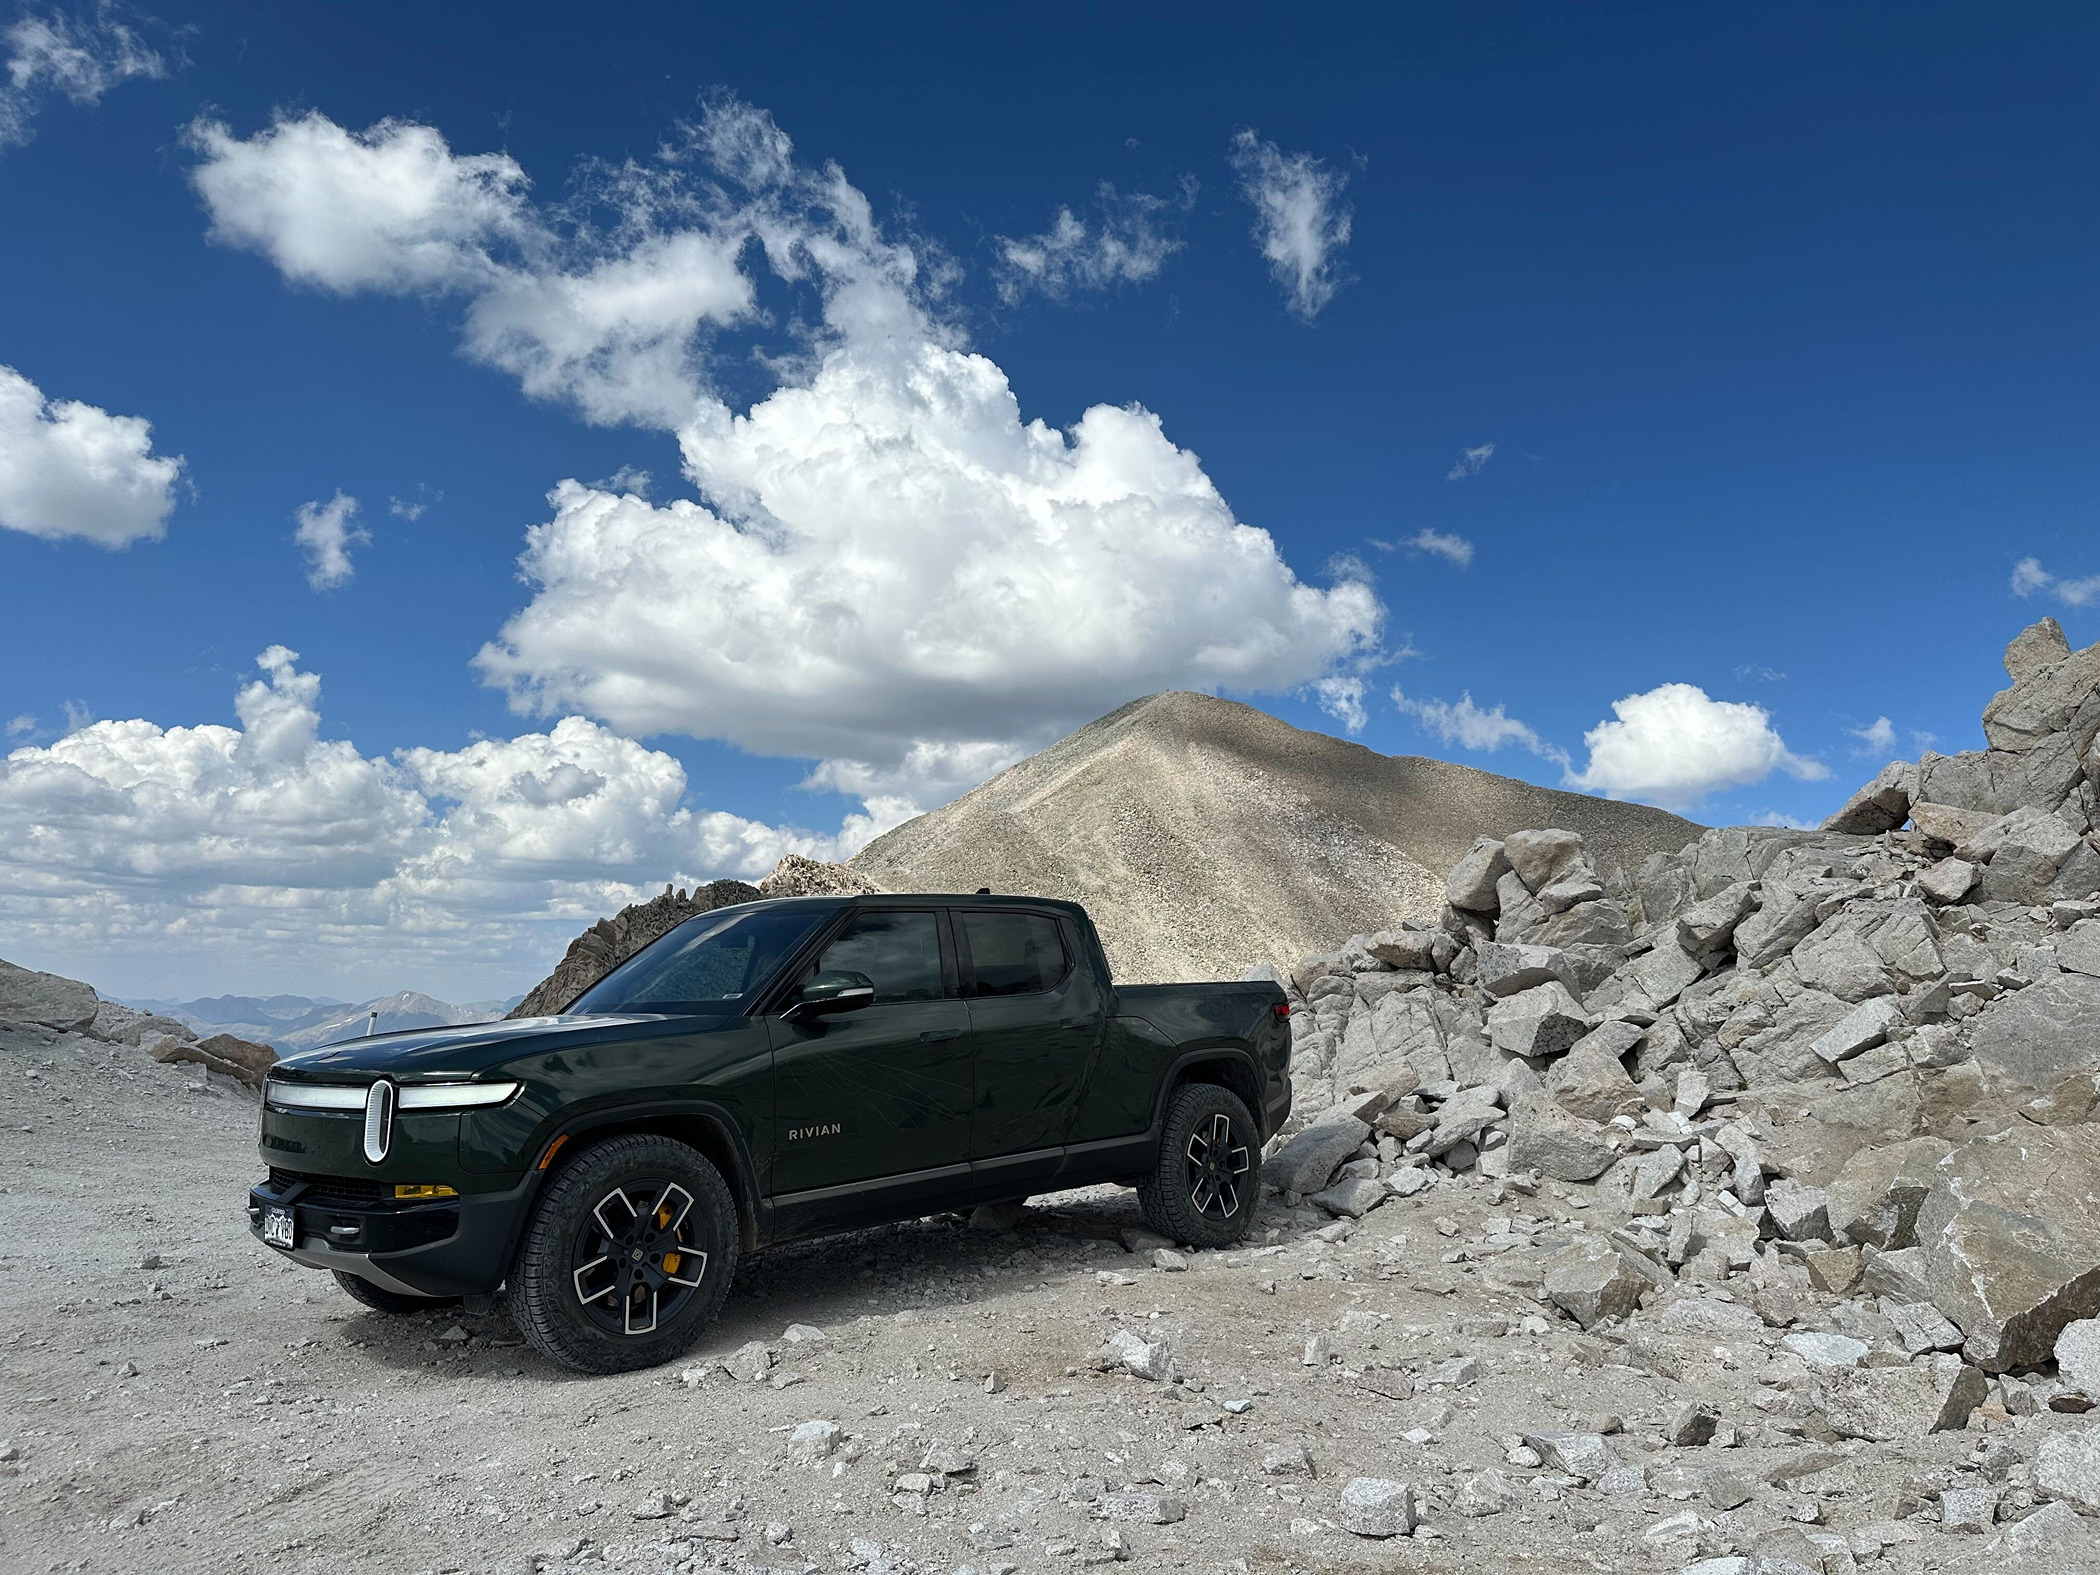 Rivian R1T R1S Where are the Rivian "adventurers"? image9